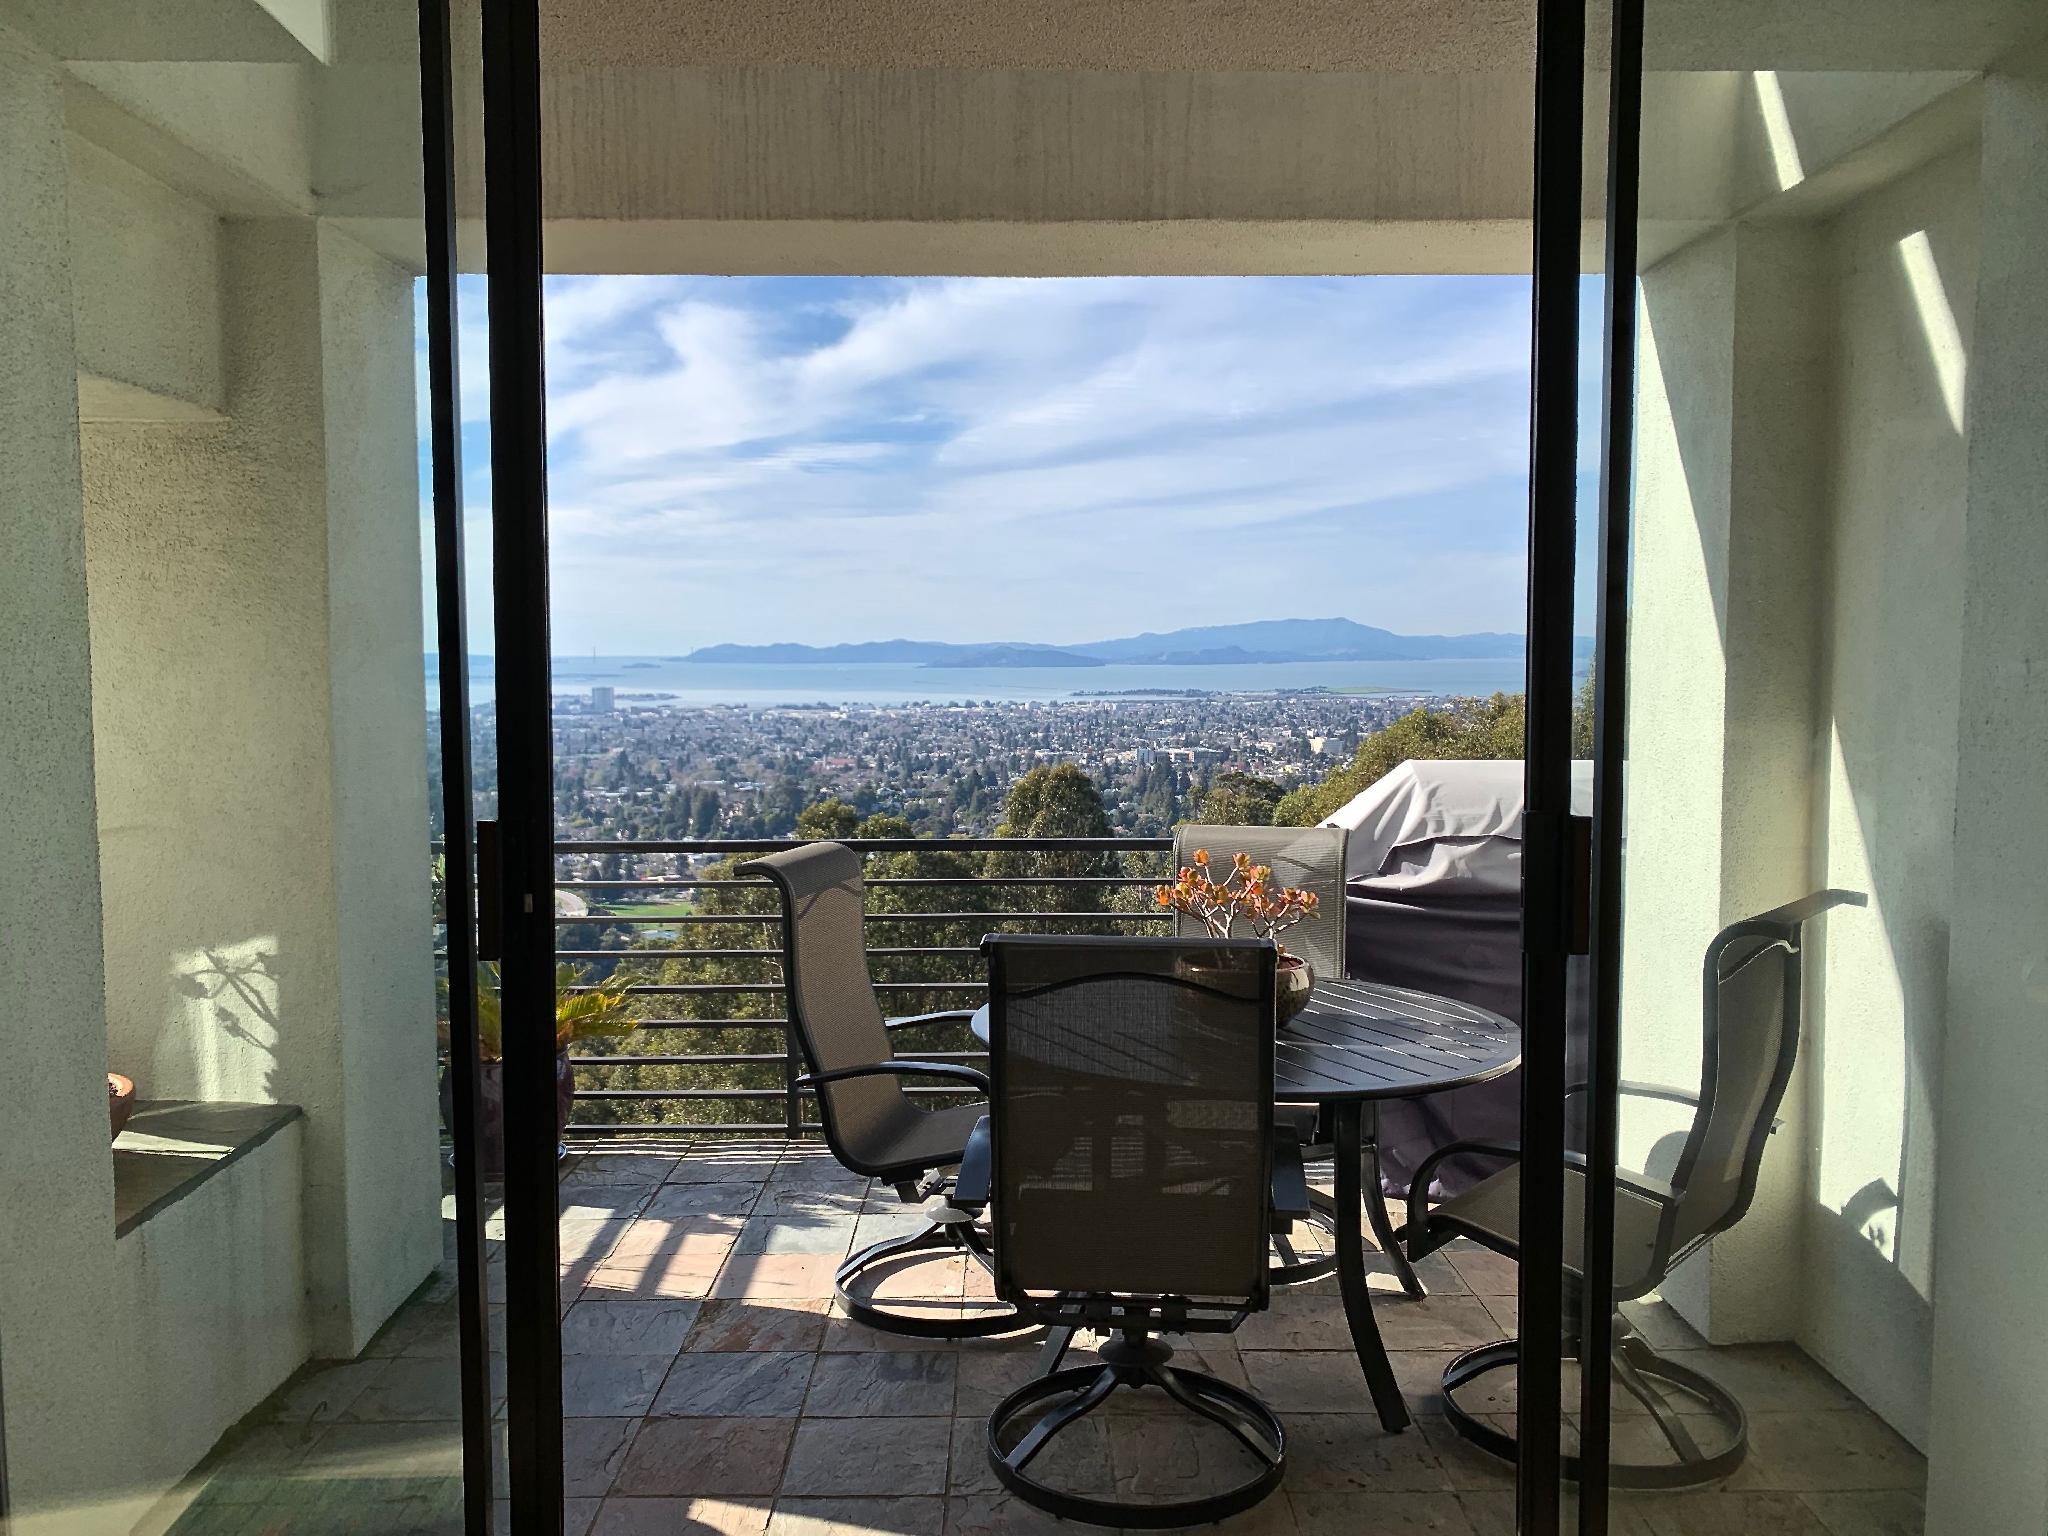 Claremont Hills 3 bedroom home with stunning views overlooking San Francisco Bay